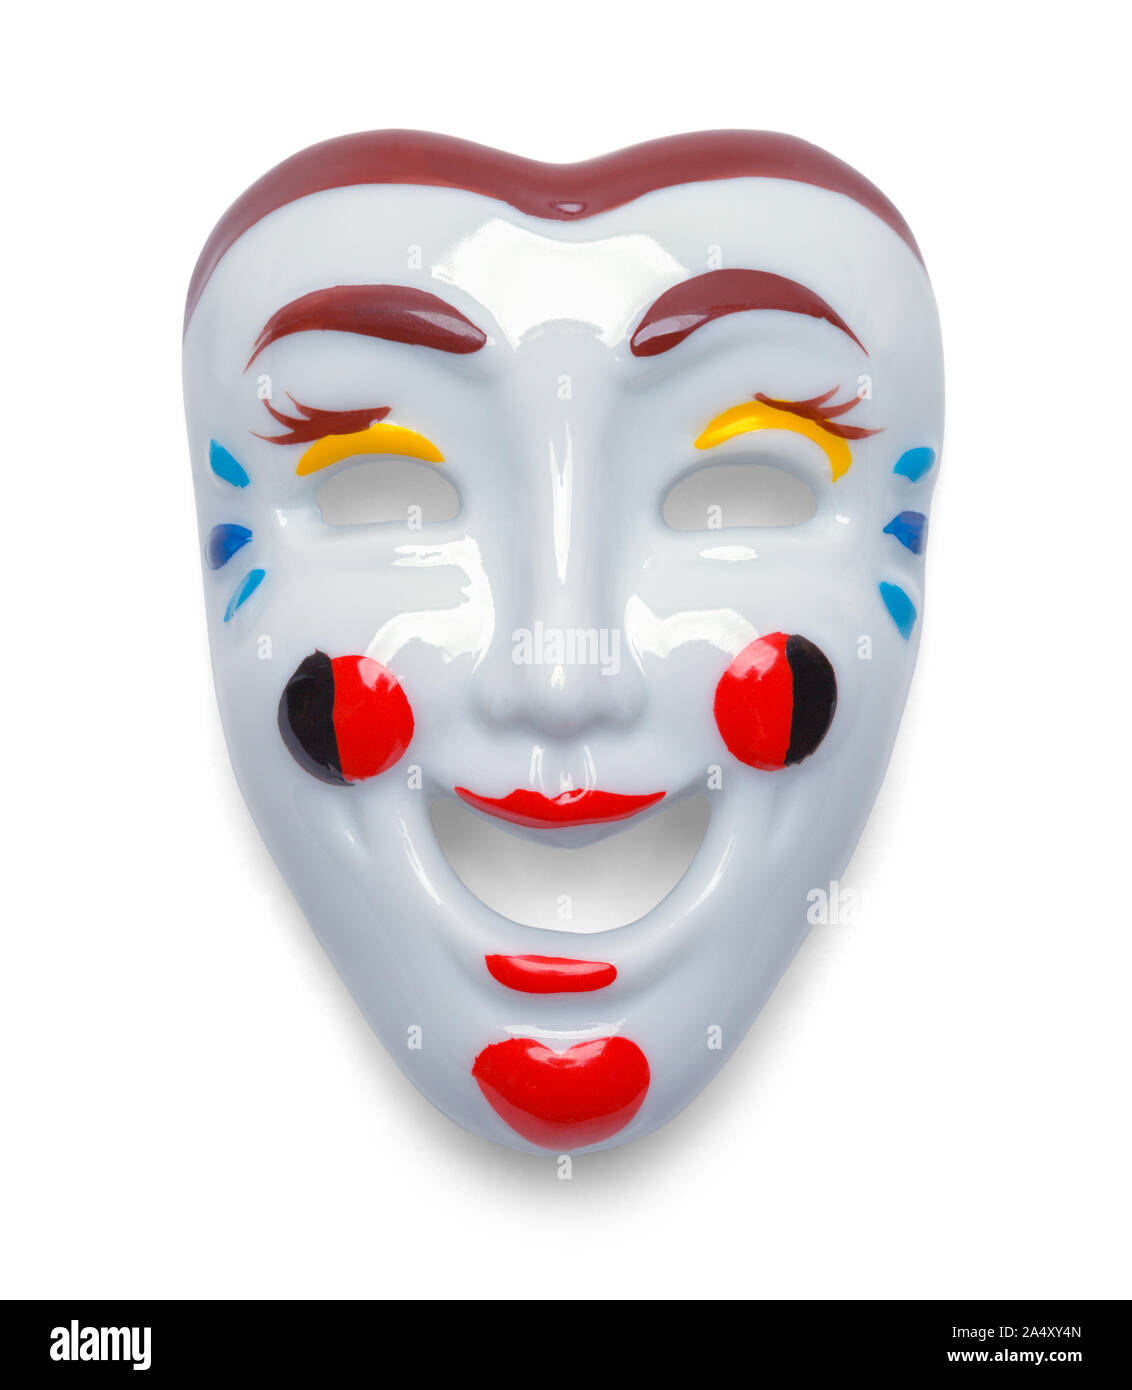 Comedy Theater Movie Mask Isolated on White Background. Stock Photo